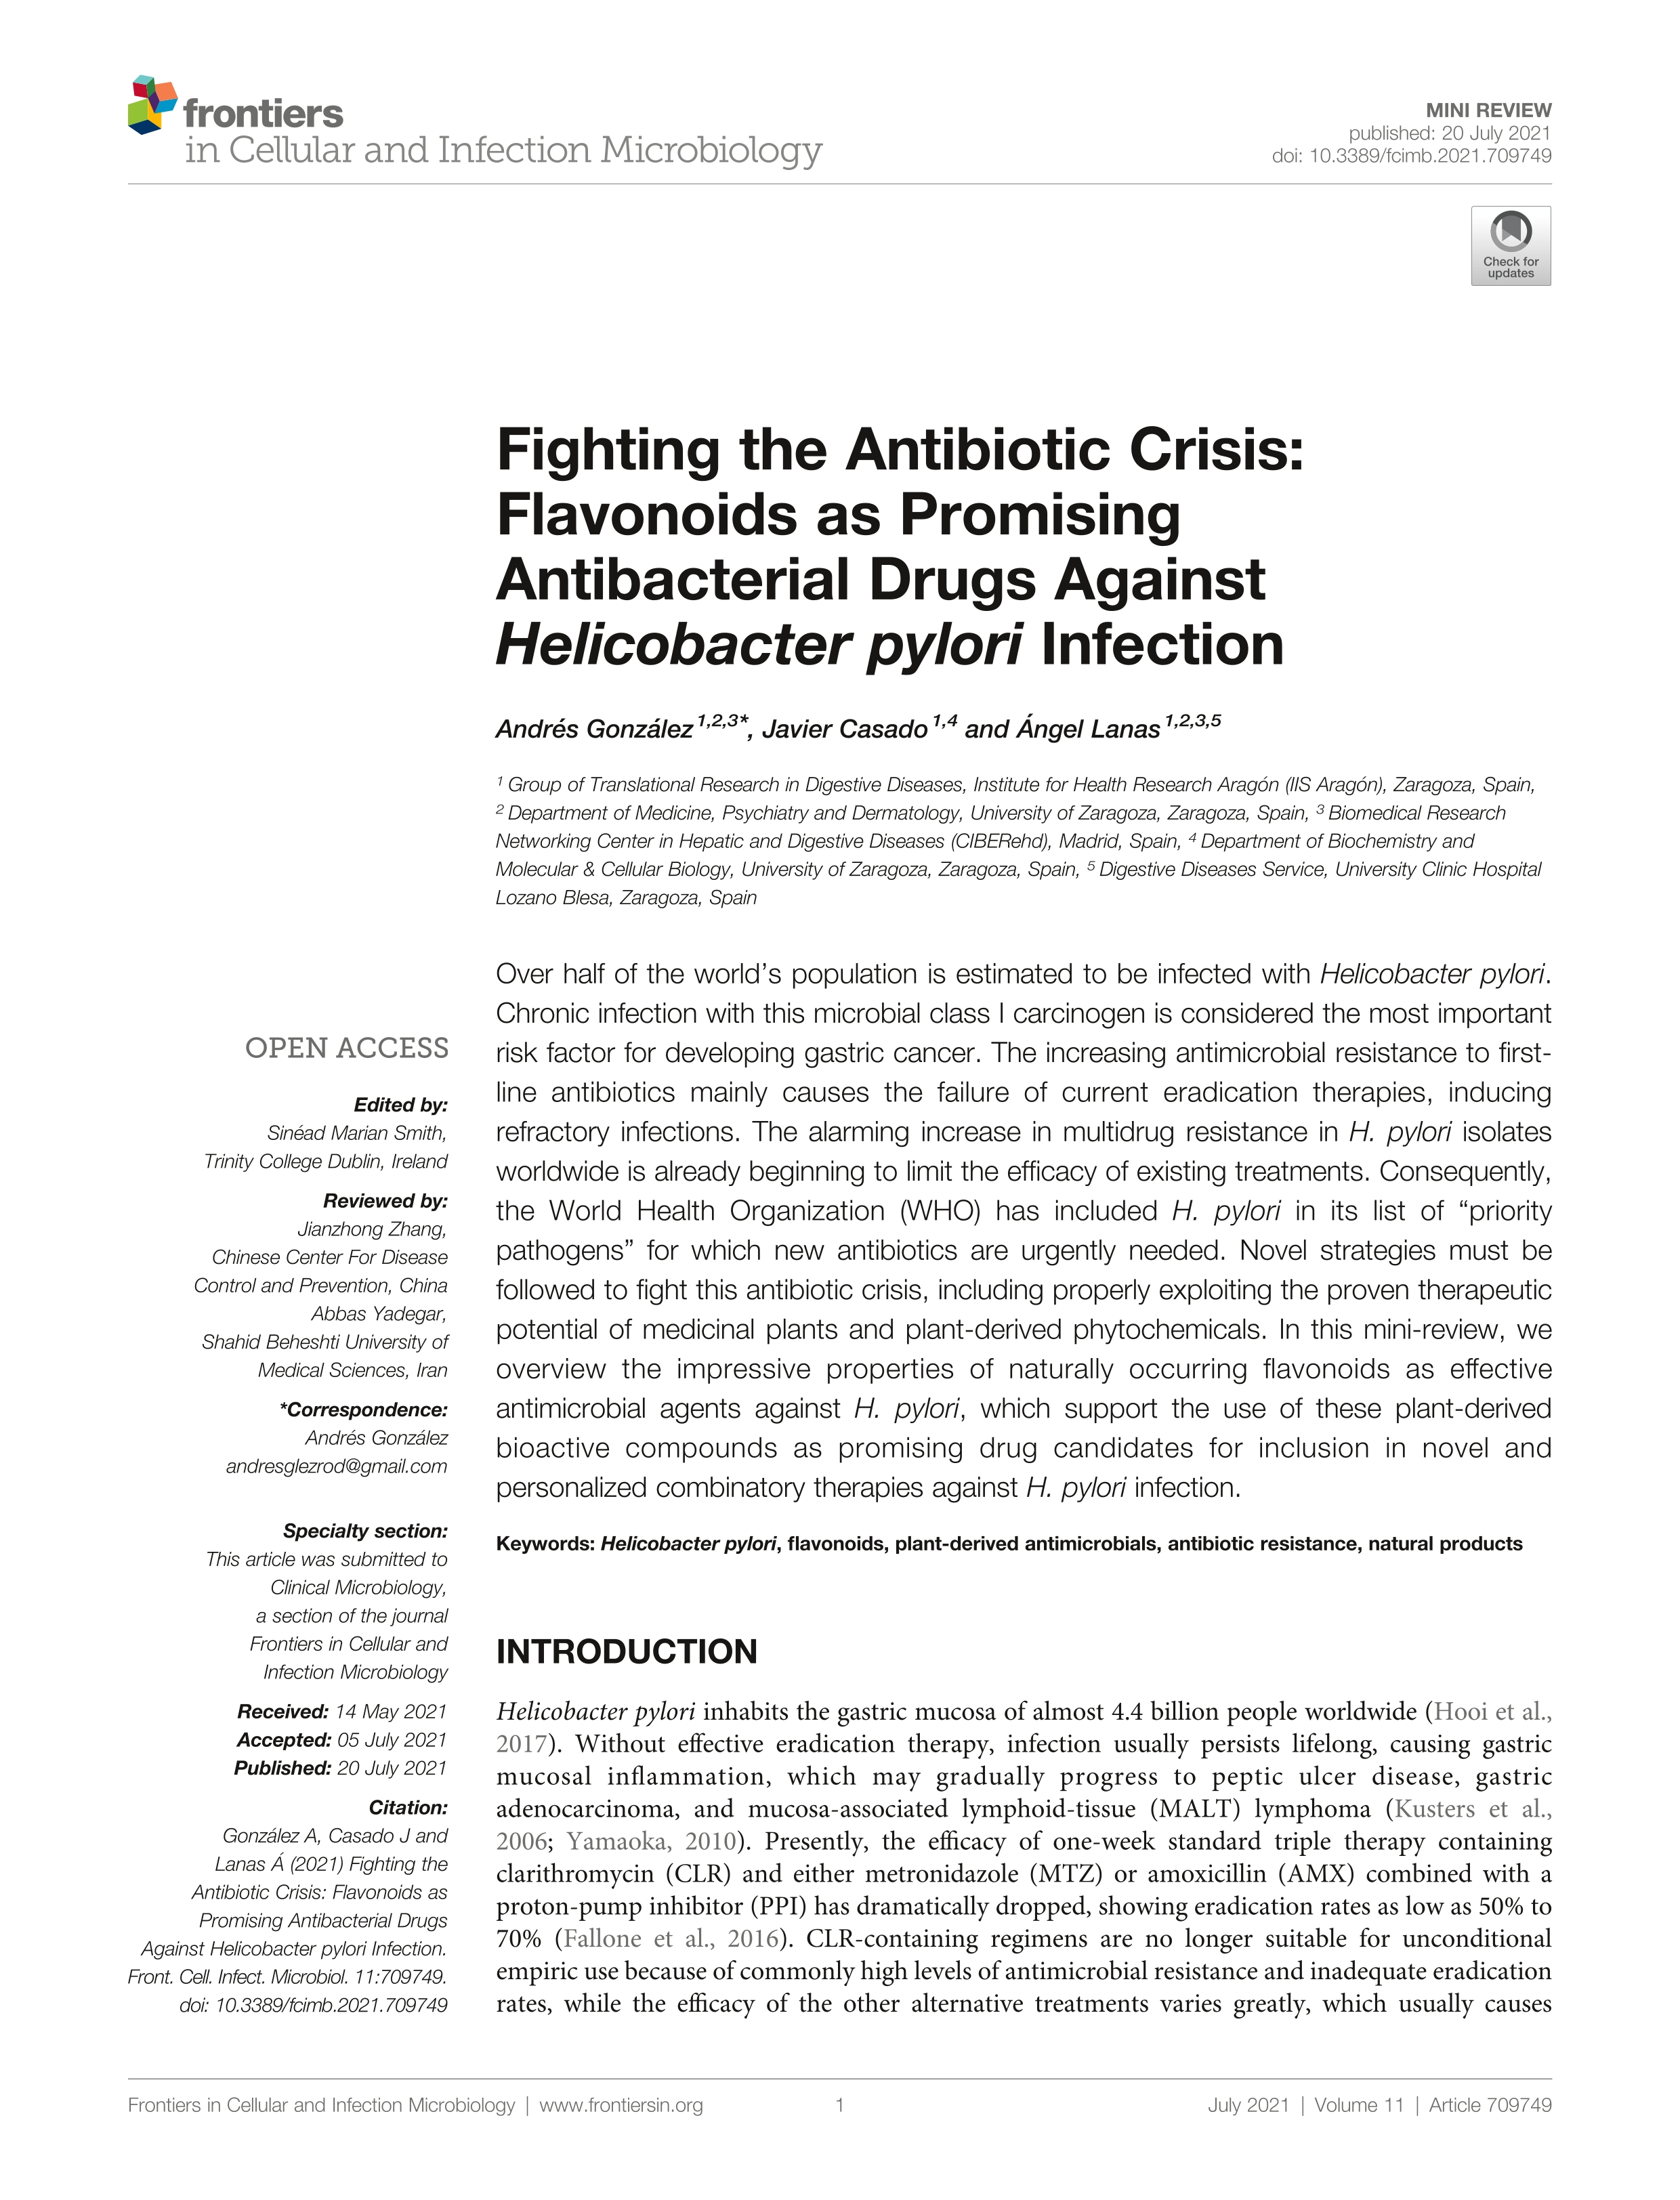 Fighting the antibiotic crisis: flavonoids as promising antibacterial drugs against Helicobacter pylori infection